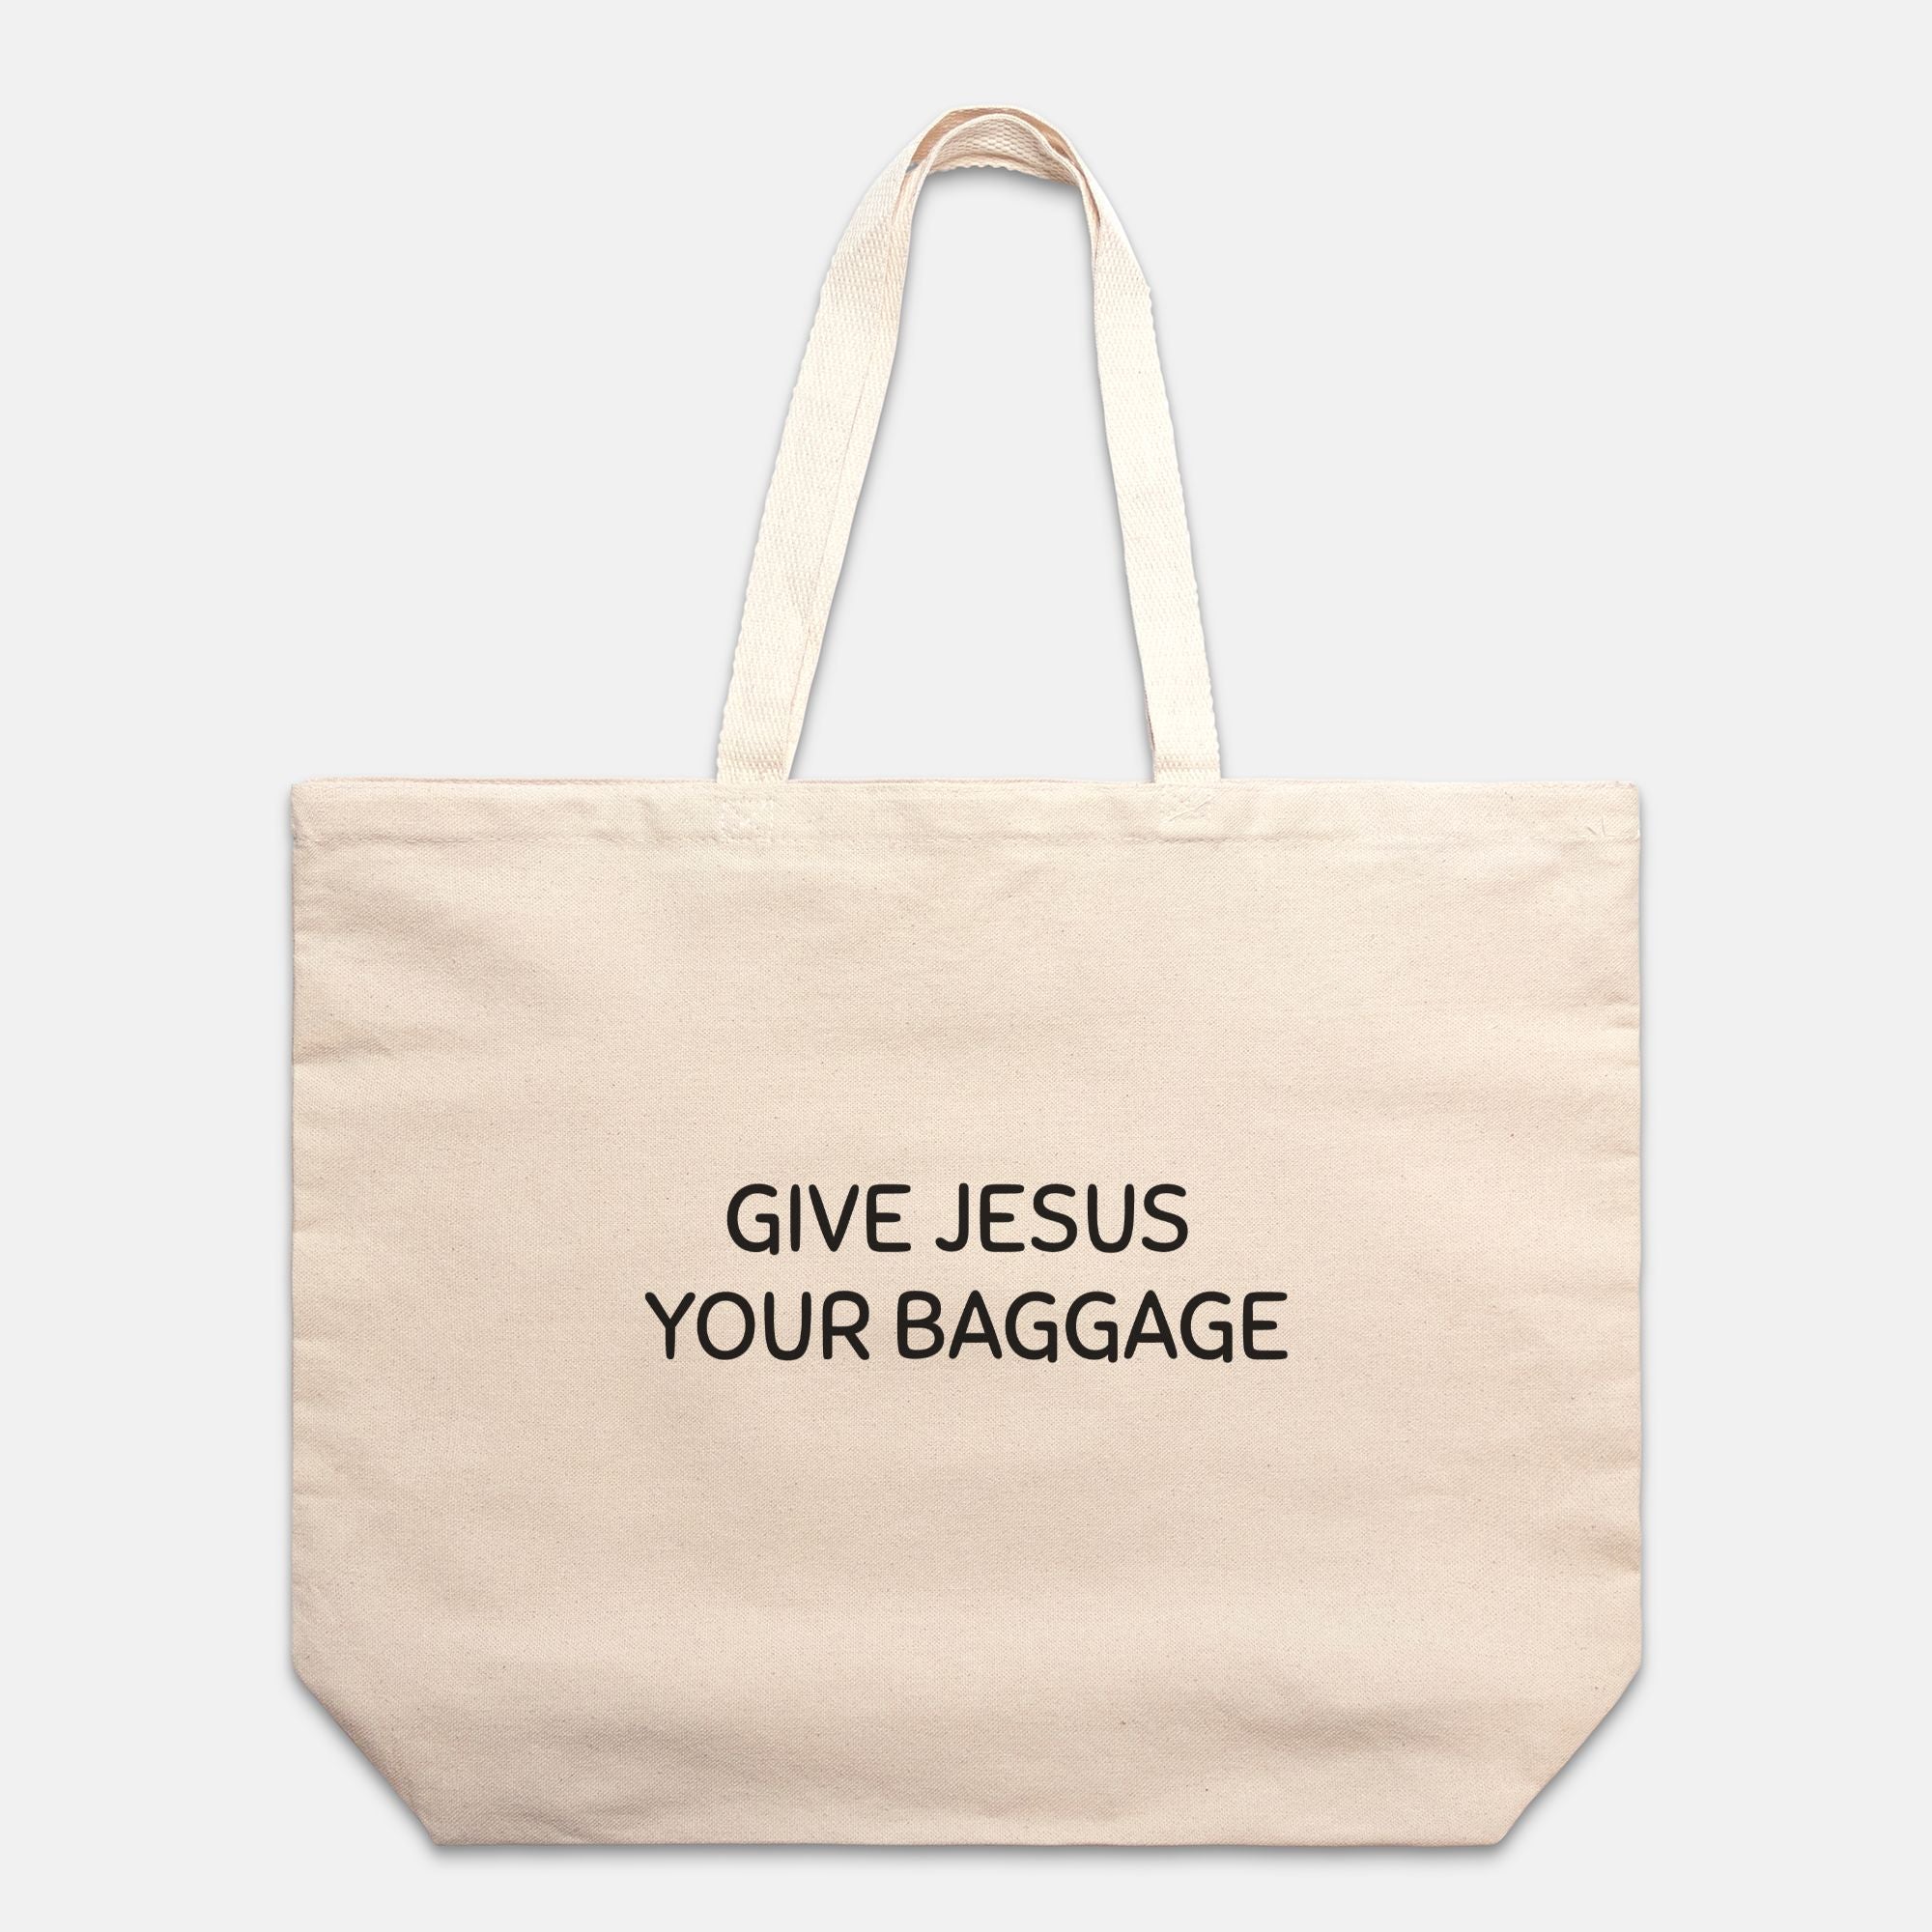 InterestPrint Christian Religious Bible Verse Jesus Words Leather Tote Bags  Handbags with Zipper for Women : Amazon.in: Shoes & Handbags